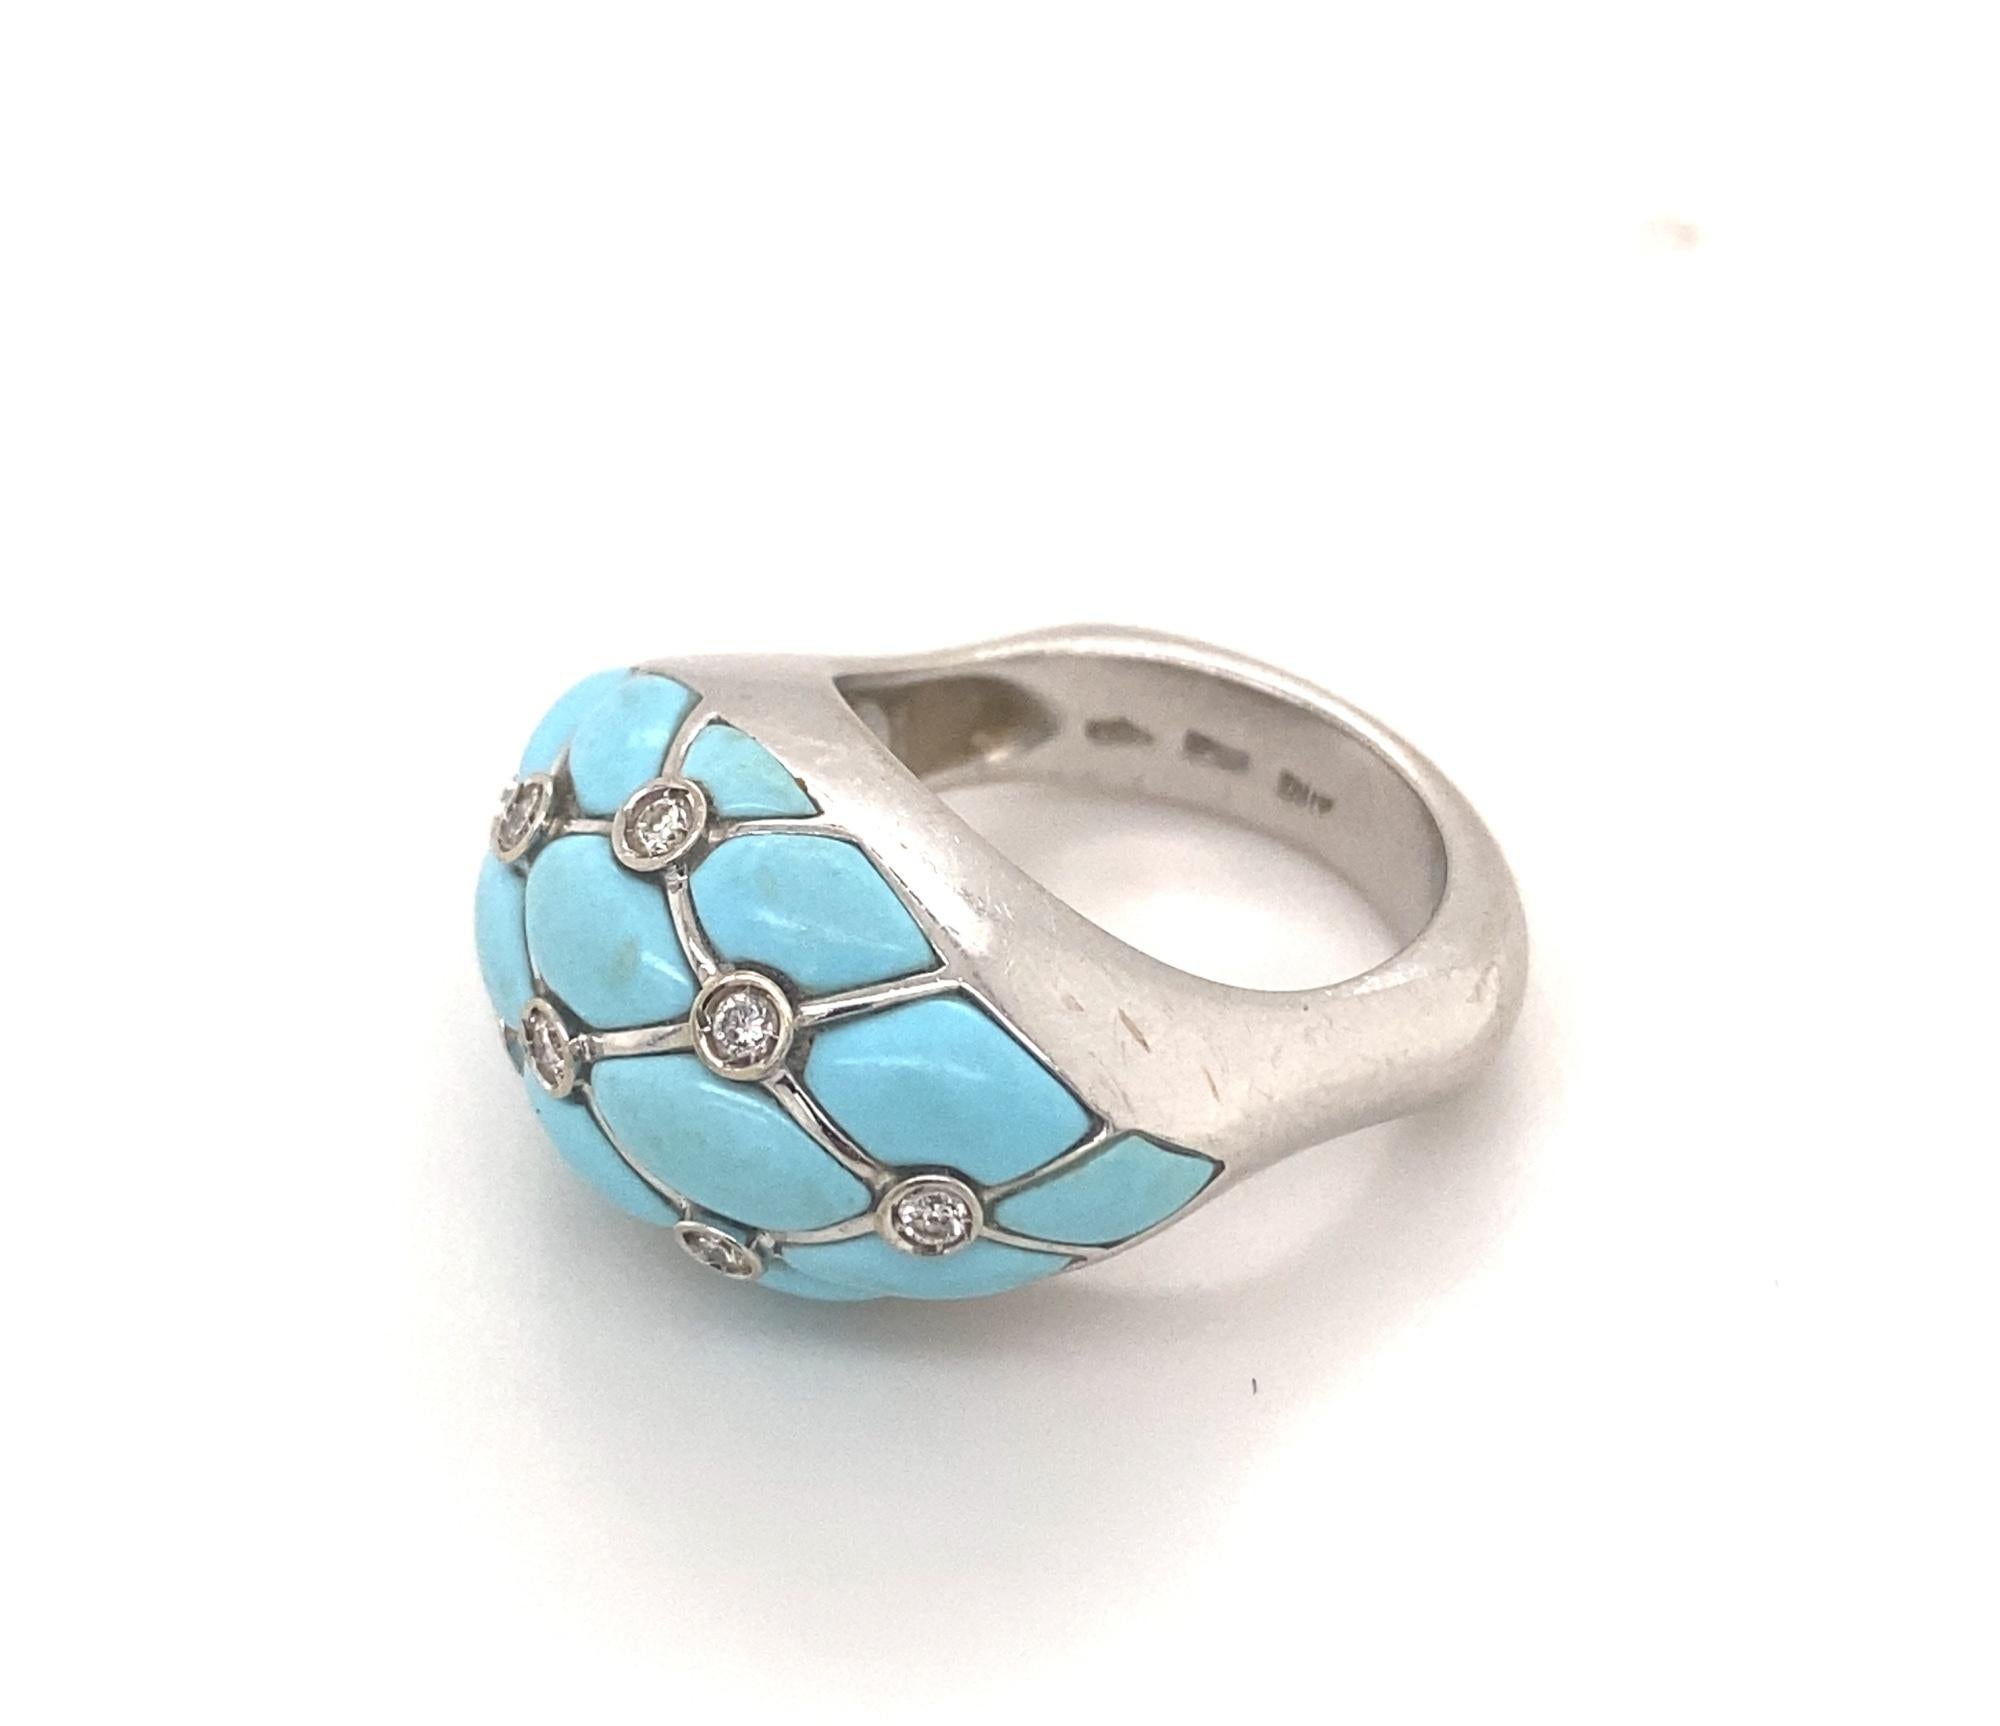 Vintage Designer Turquoise Diamonds Italian 18K White Gold Ring. This is a beautiful ring with Italian hallmarks and makers marks for 18K gold. The ring has a unique square shape with a dome of natural turquoise sections and 9 diamonds. The 16